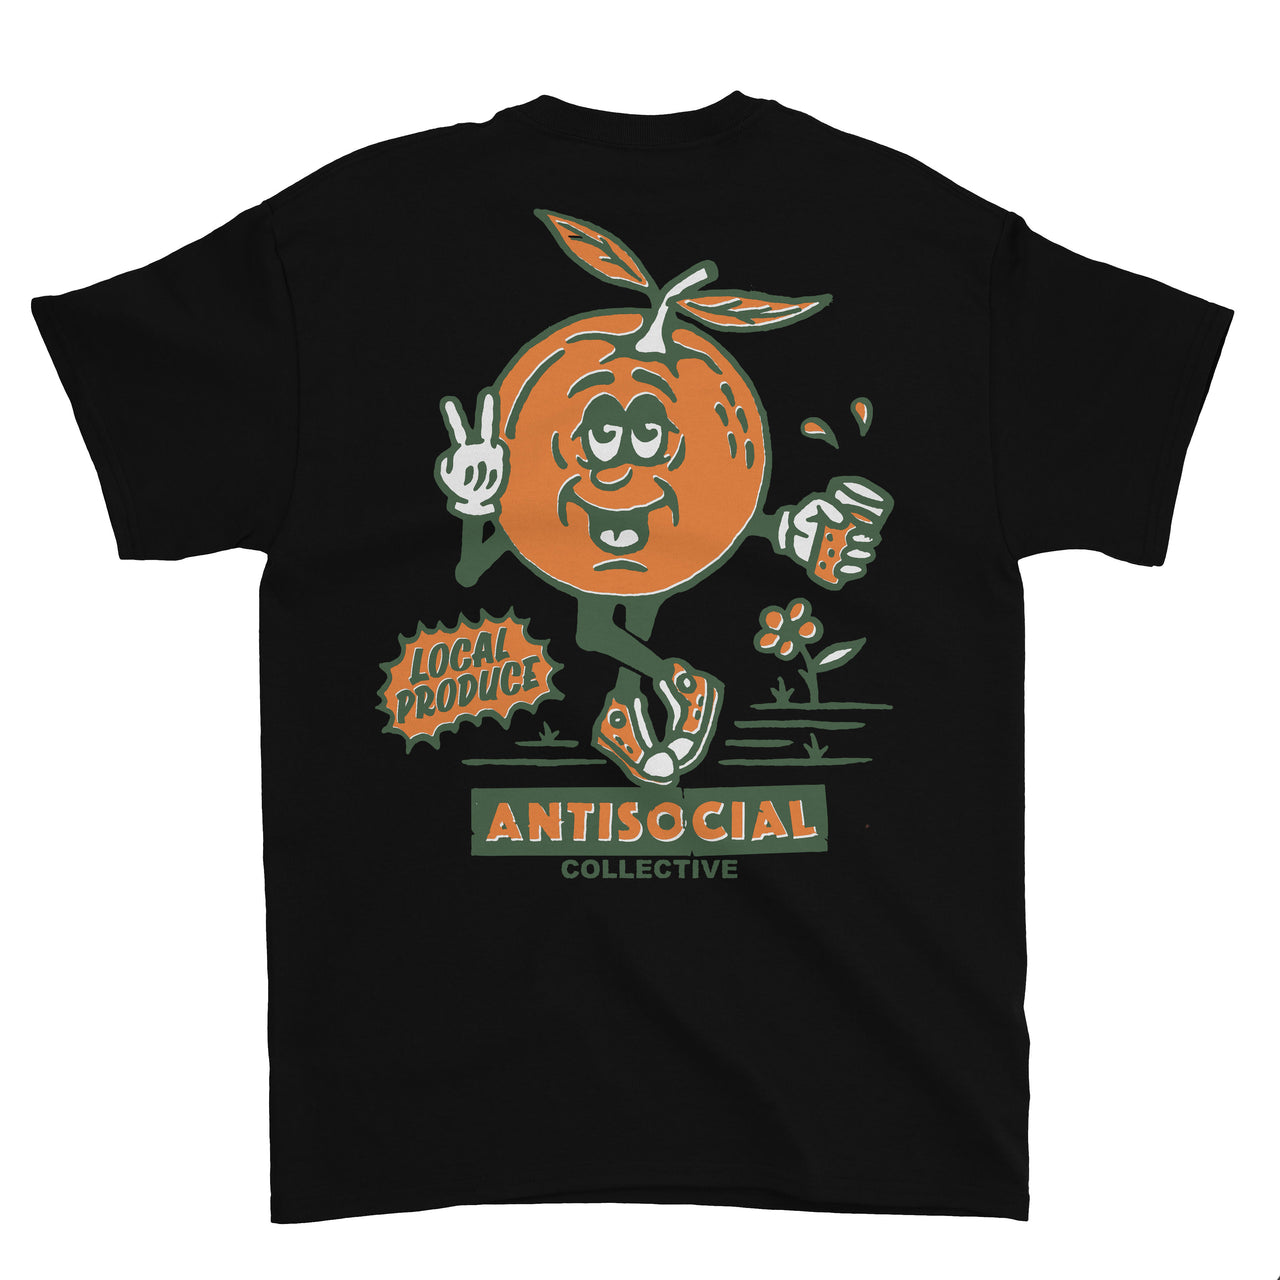 ANTISOCIAL - LOCAL PRODUCE S/S TEE - BLACK - Antisocial Collective